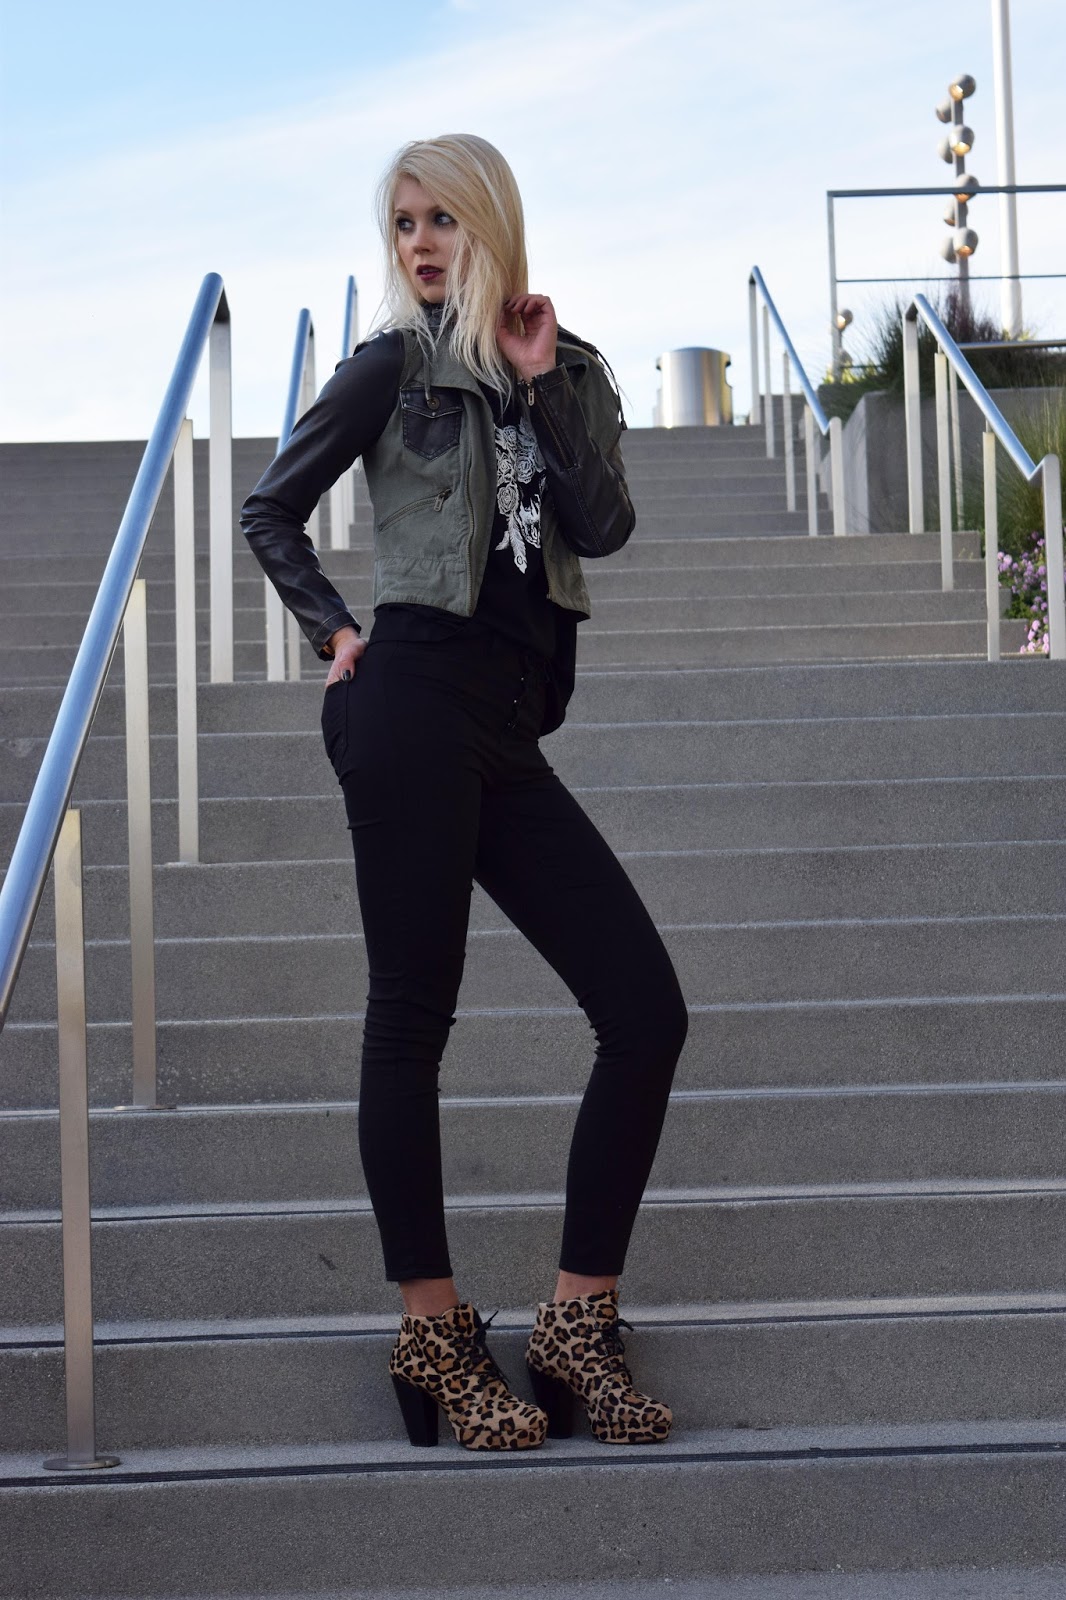 high waisted jeans, black, army inspired jacket, jacket, leopard boots.